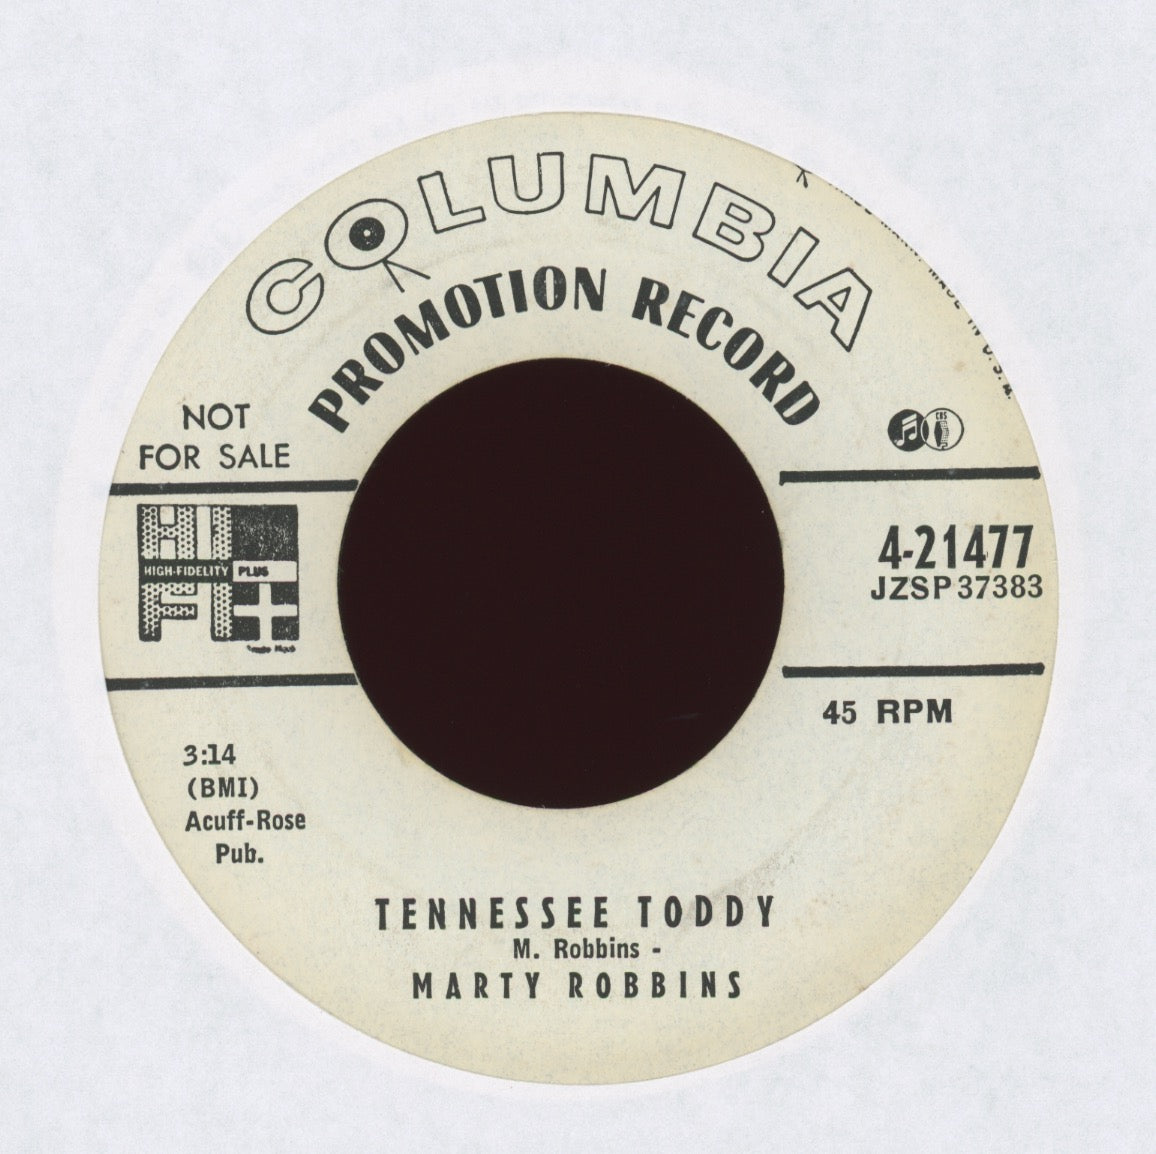 Marty Robbins - Tennessee Toddy on Columbia Promo